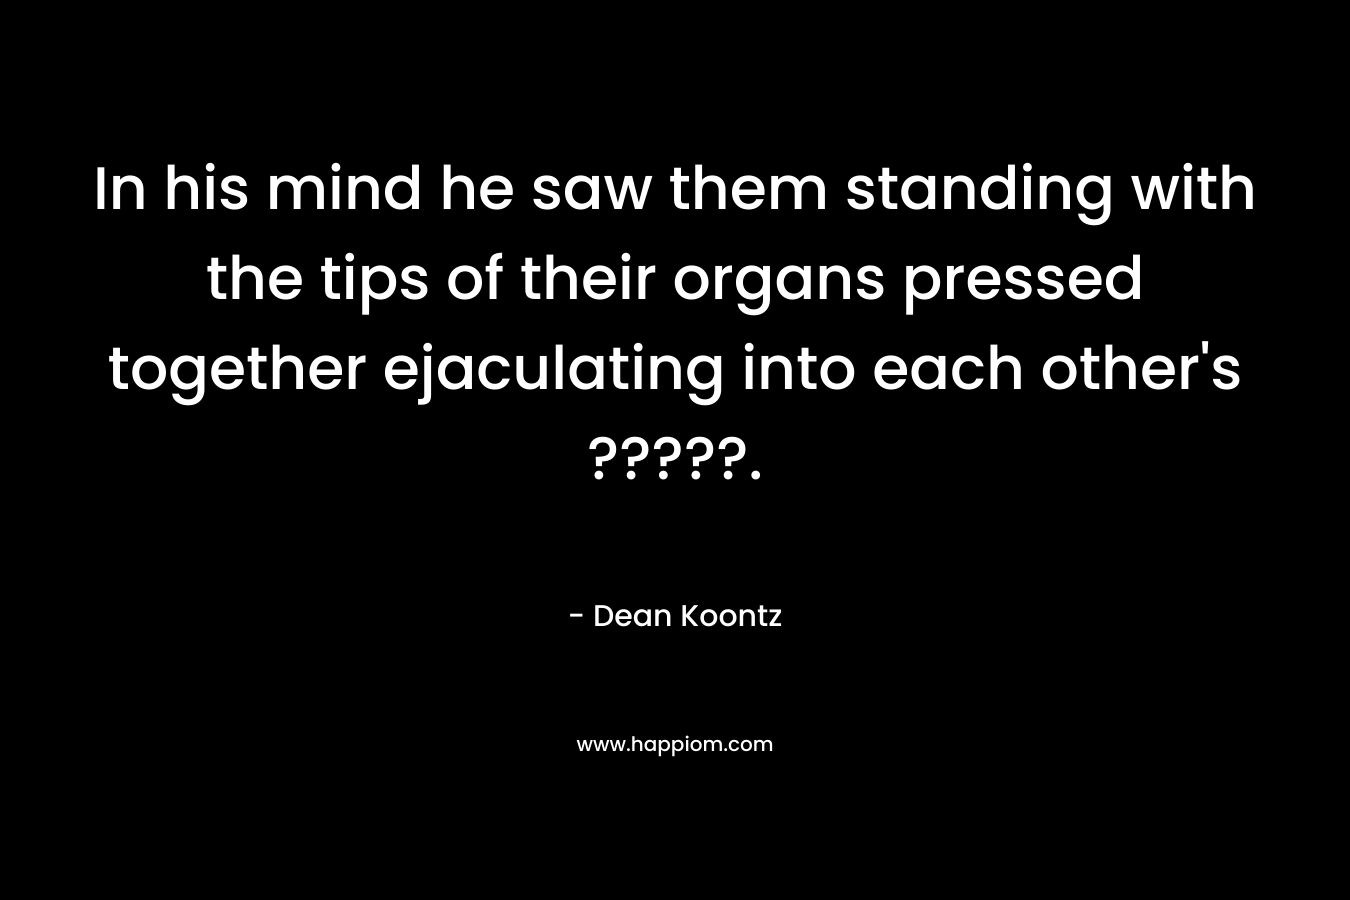 In his mind he saw them standing with the tips of their organs pressed together ejaculating into each other's ?????.